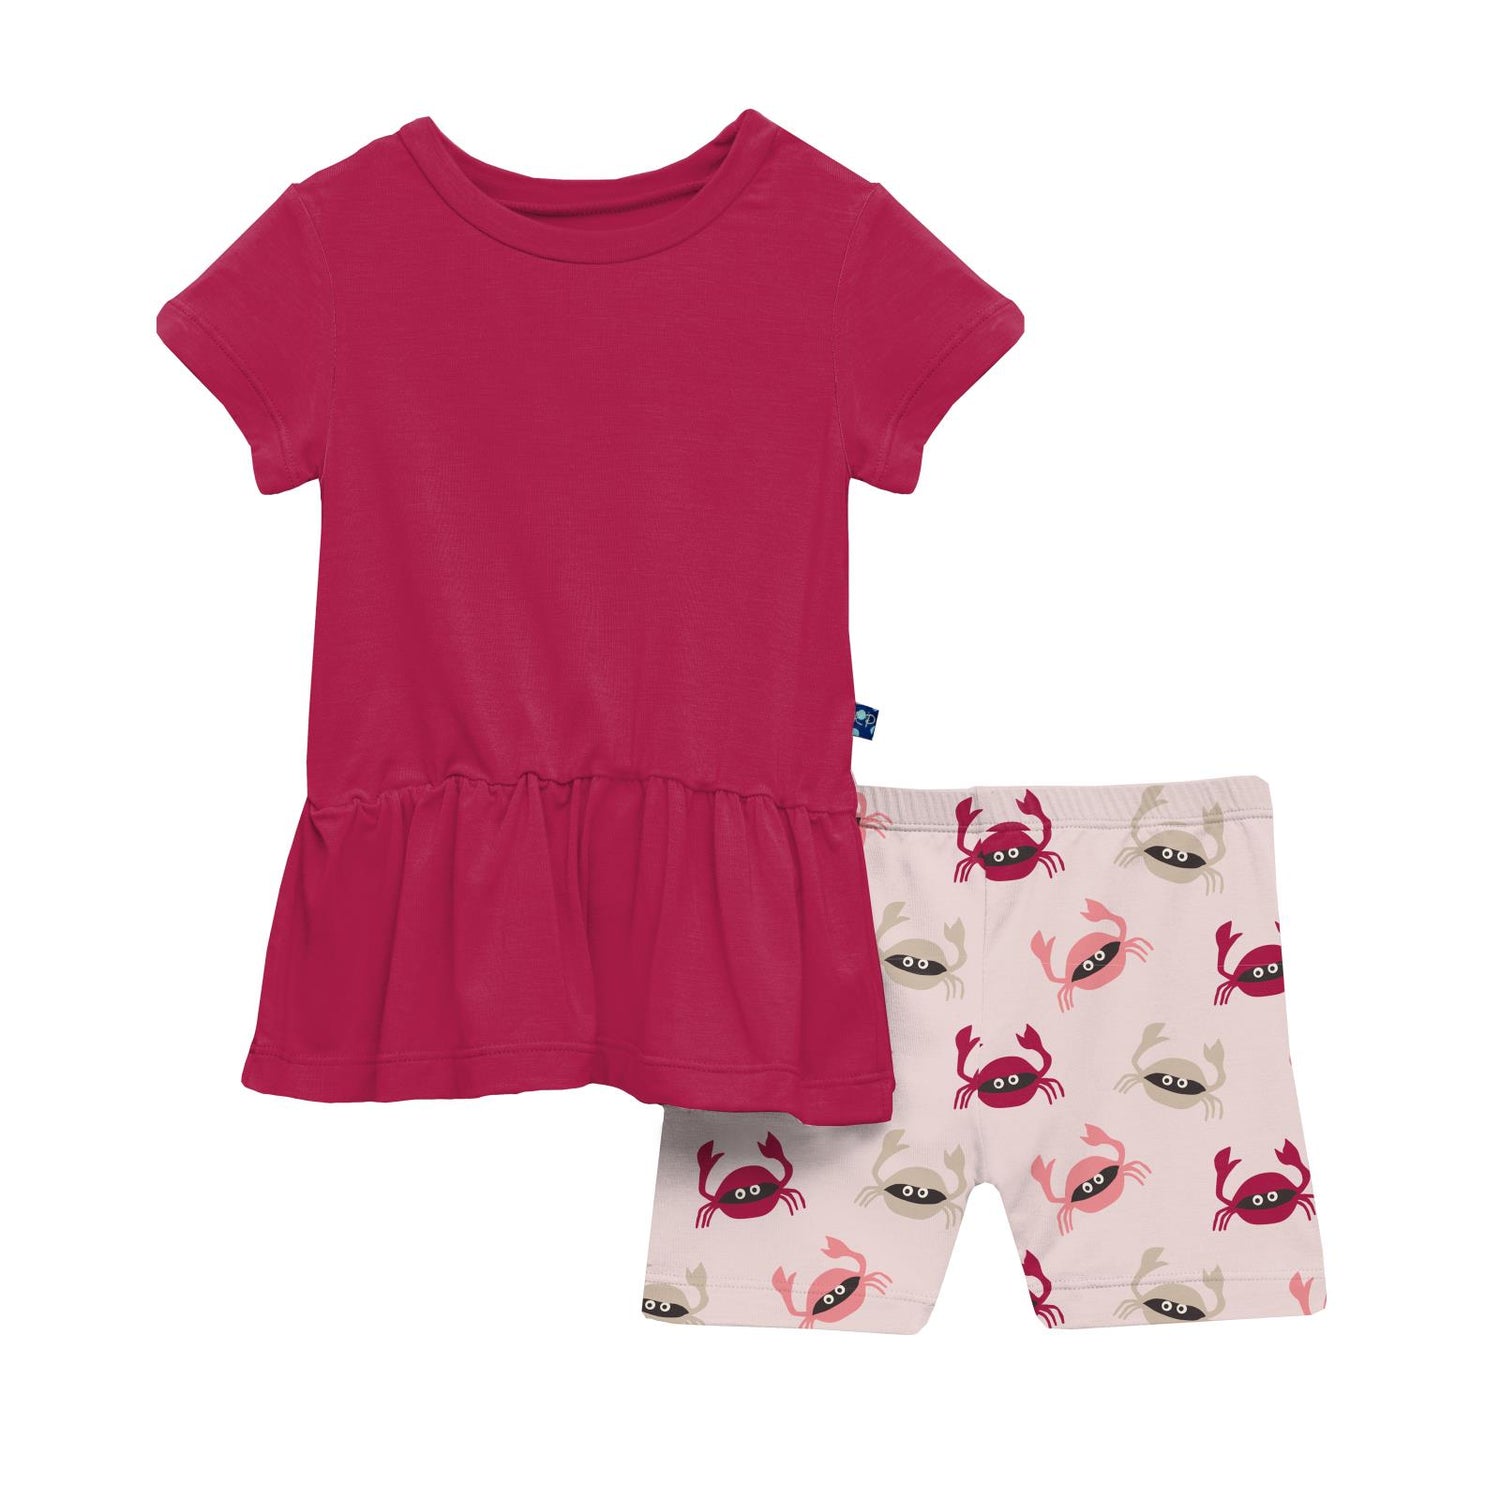 Print Short Sleeve Playtime Outfit Set in Macaroon Crabs